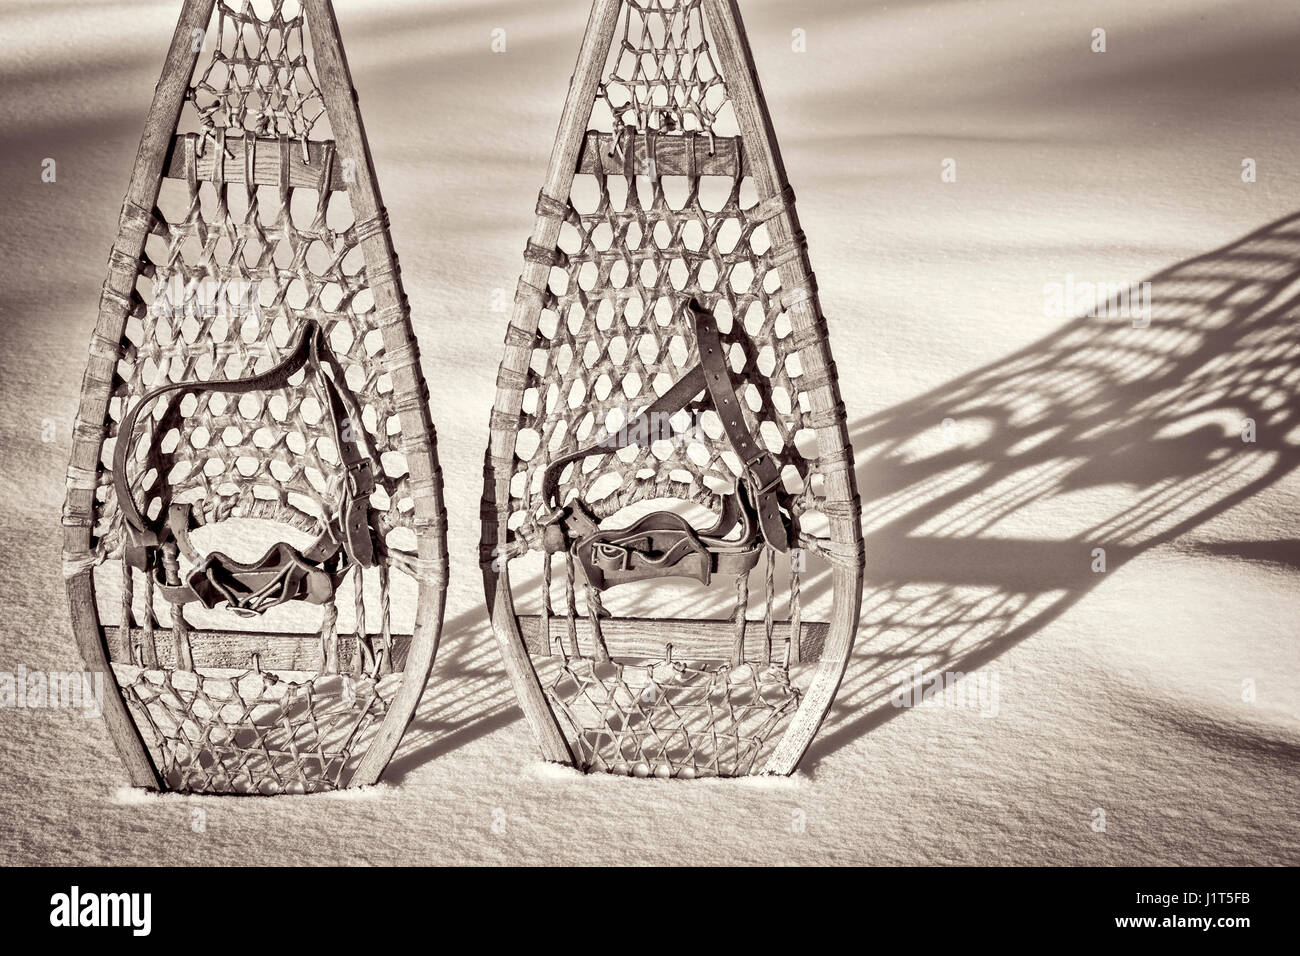 vintage wooden Huron snowshoes with leather binding in snow with shadow, retro sepia toning Stock Photo